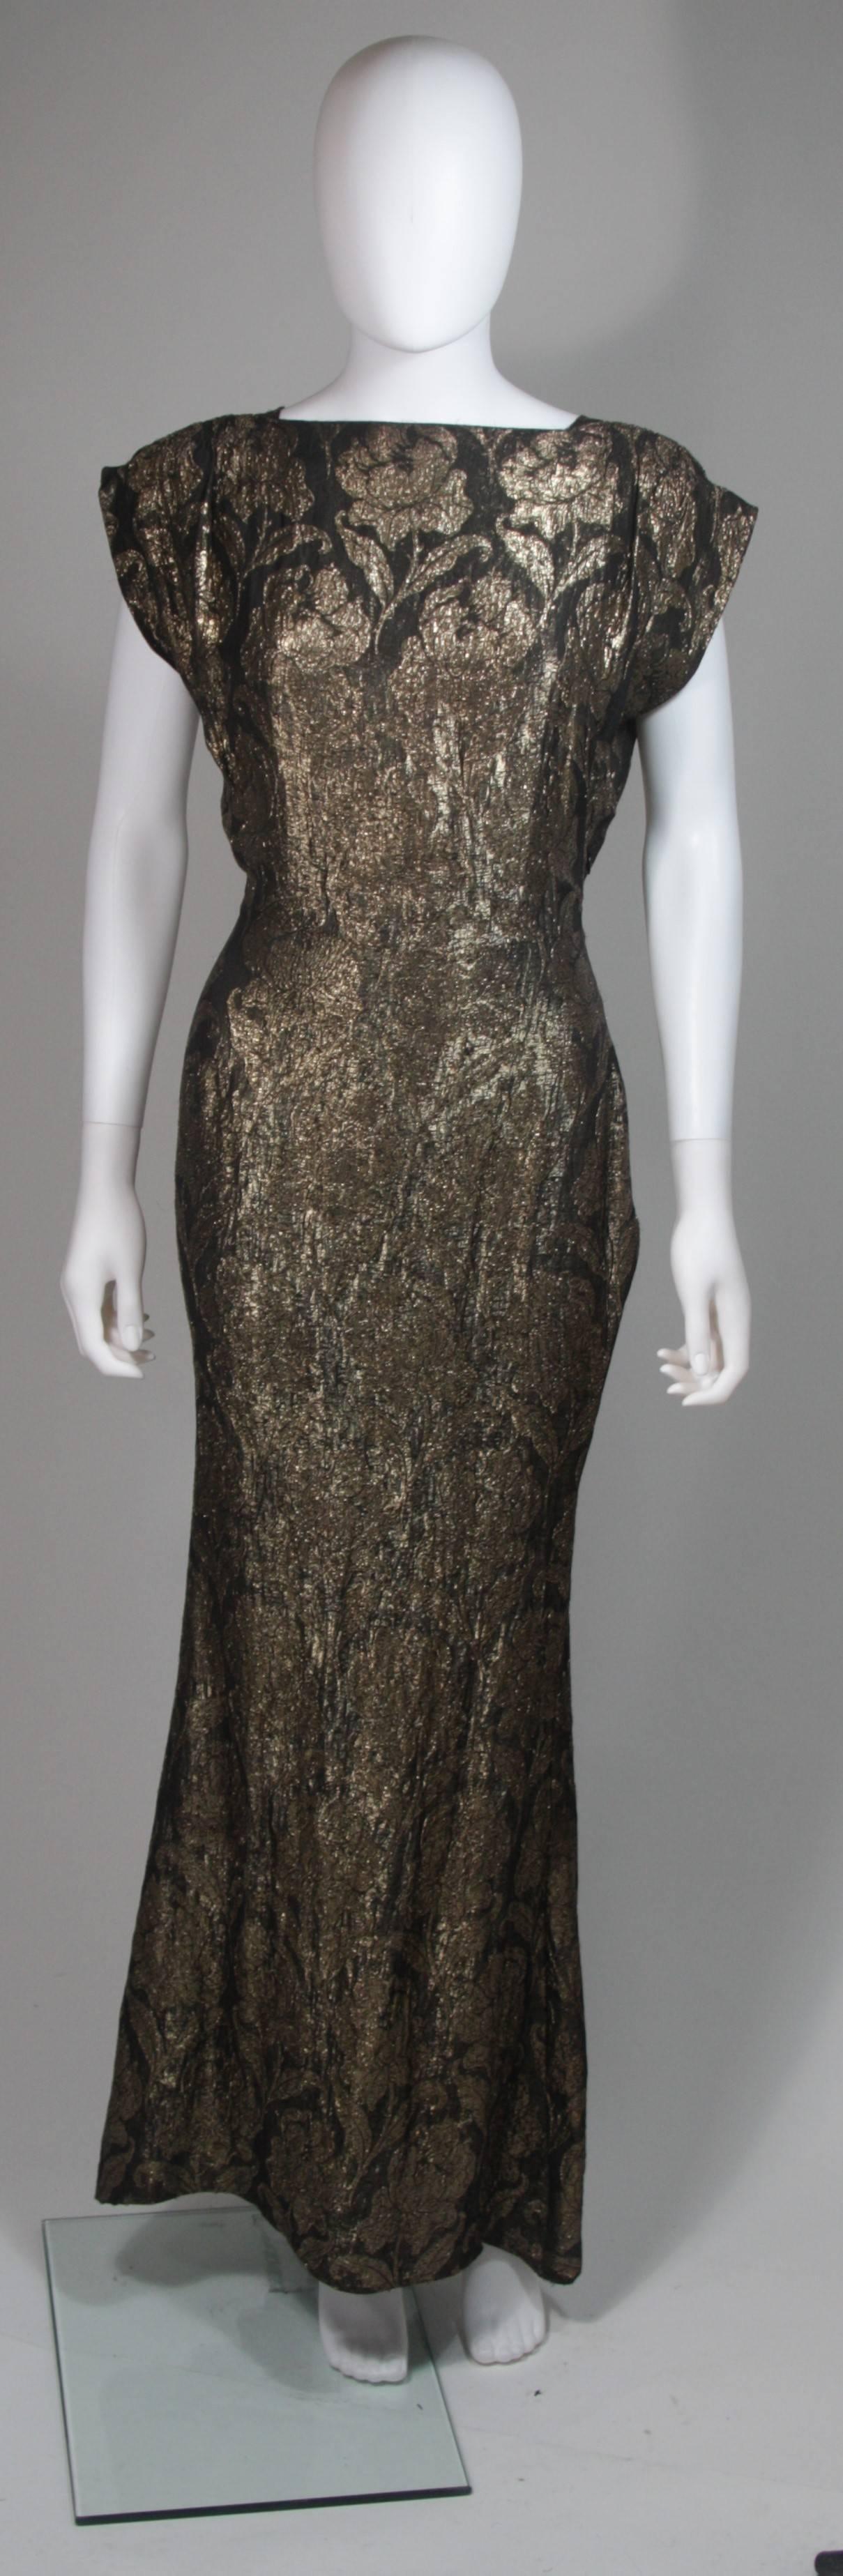 This Bullocks gown is composed of a gold and black silk lame. The back features a plunge design with godets that fall from the waist to hem for add flare. This is an absolutely stunning and rare design. There is a side zipper closure with hook and